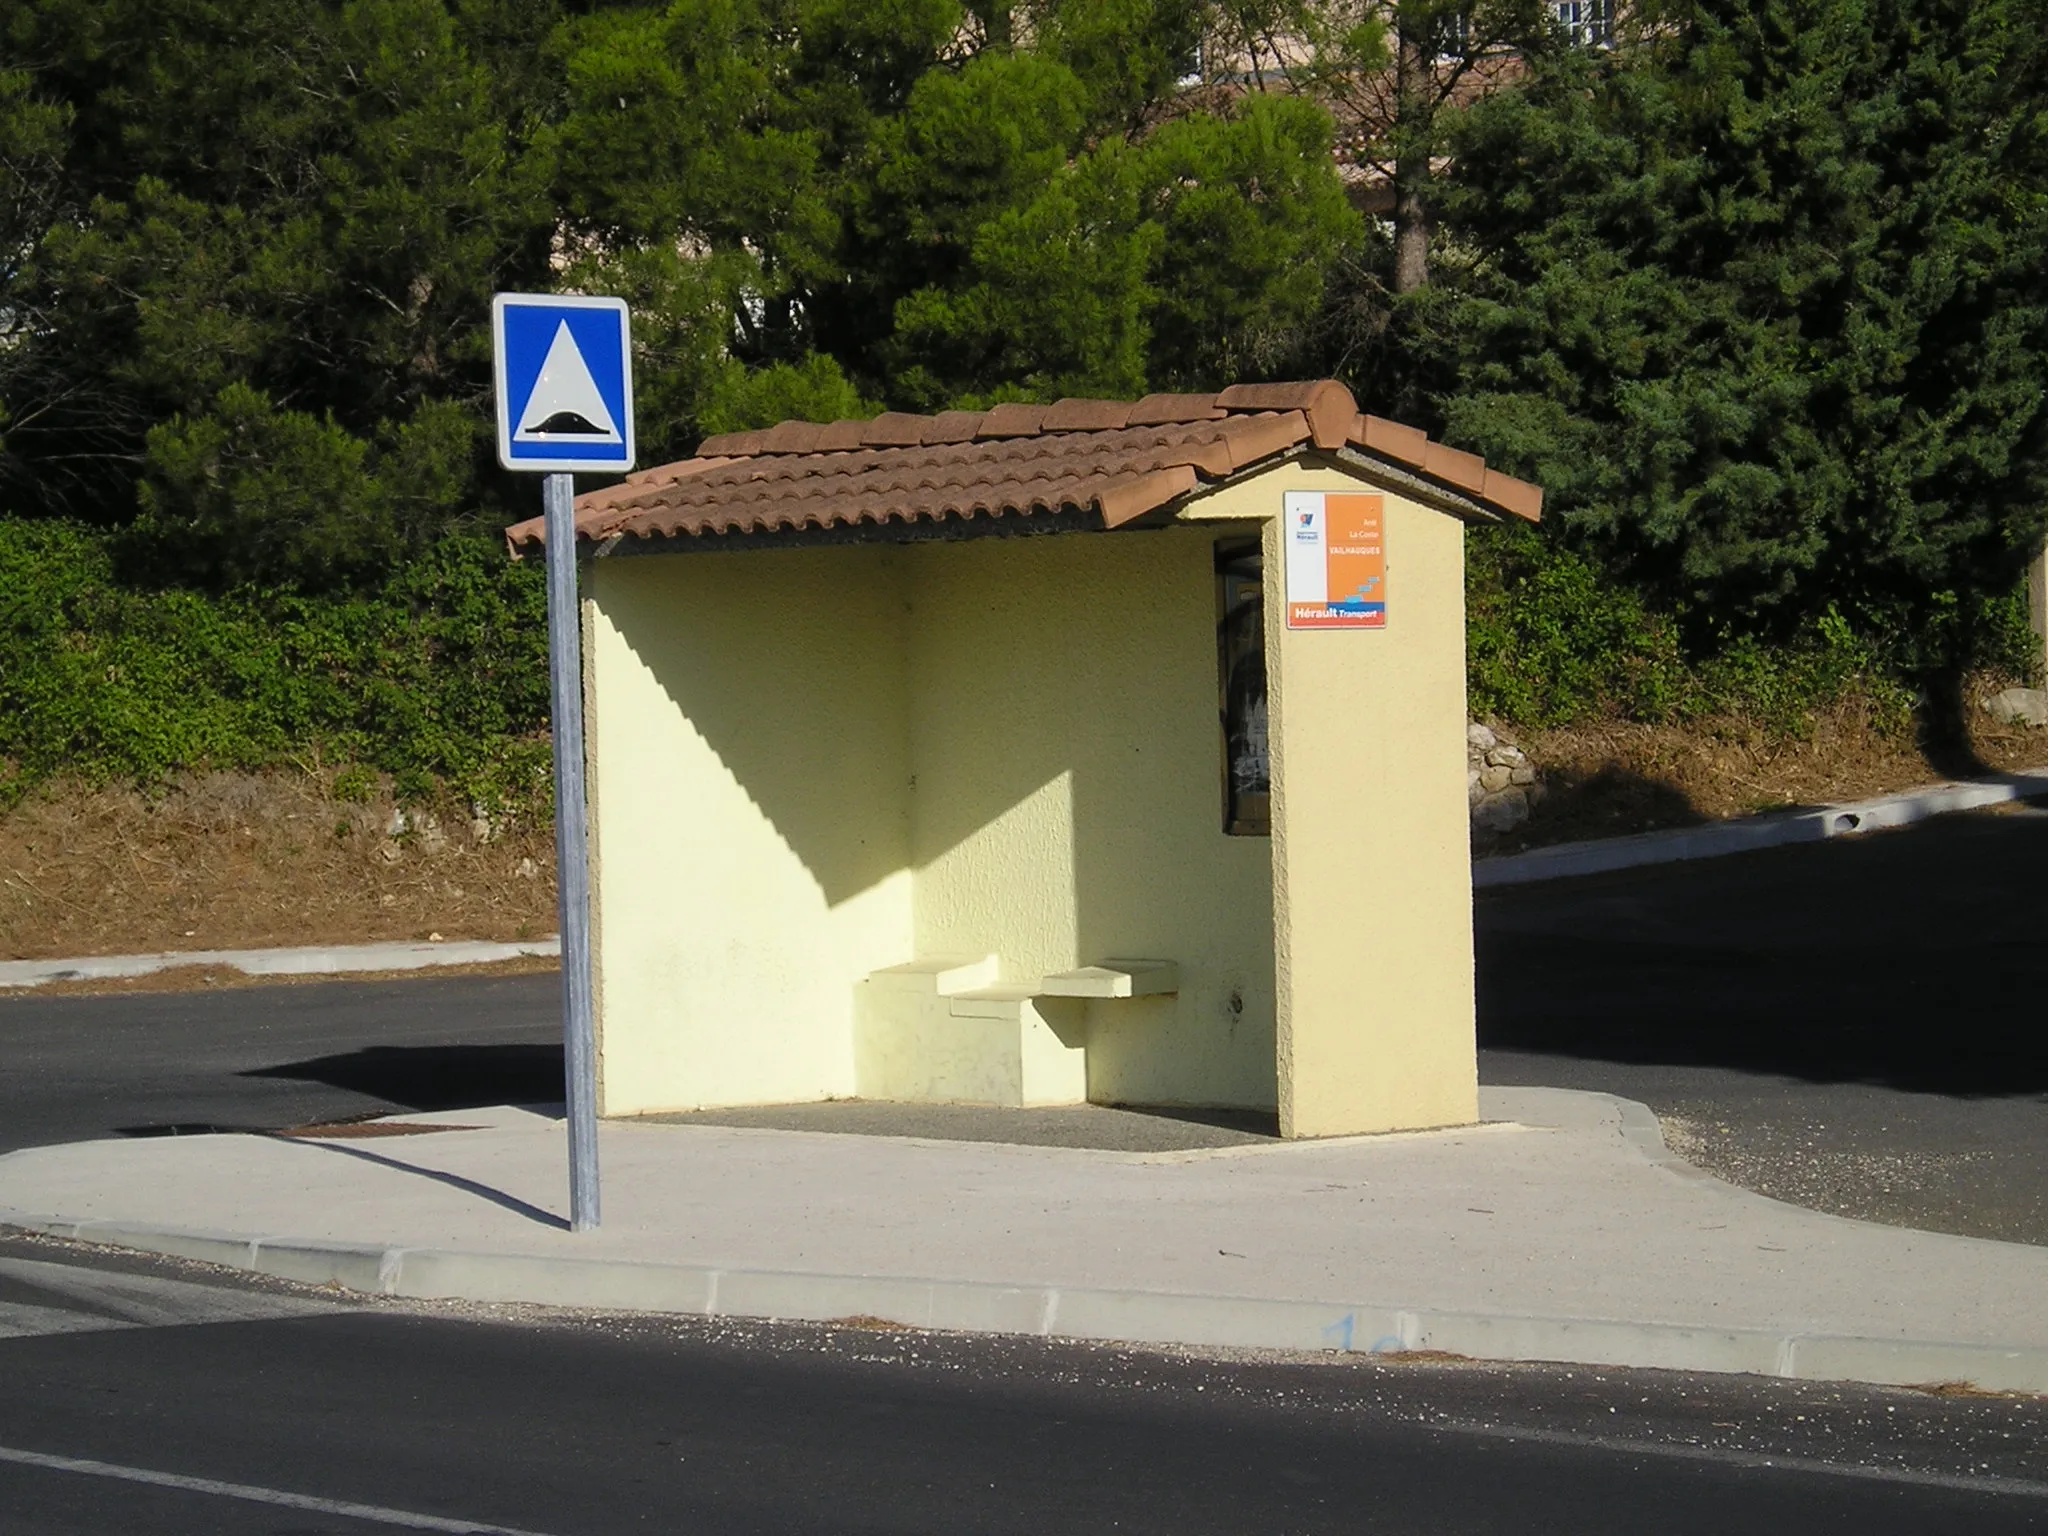 Photo showing: In Hérault, France, a bus stop of Hérault Transport operator, in Vailhauquès.